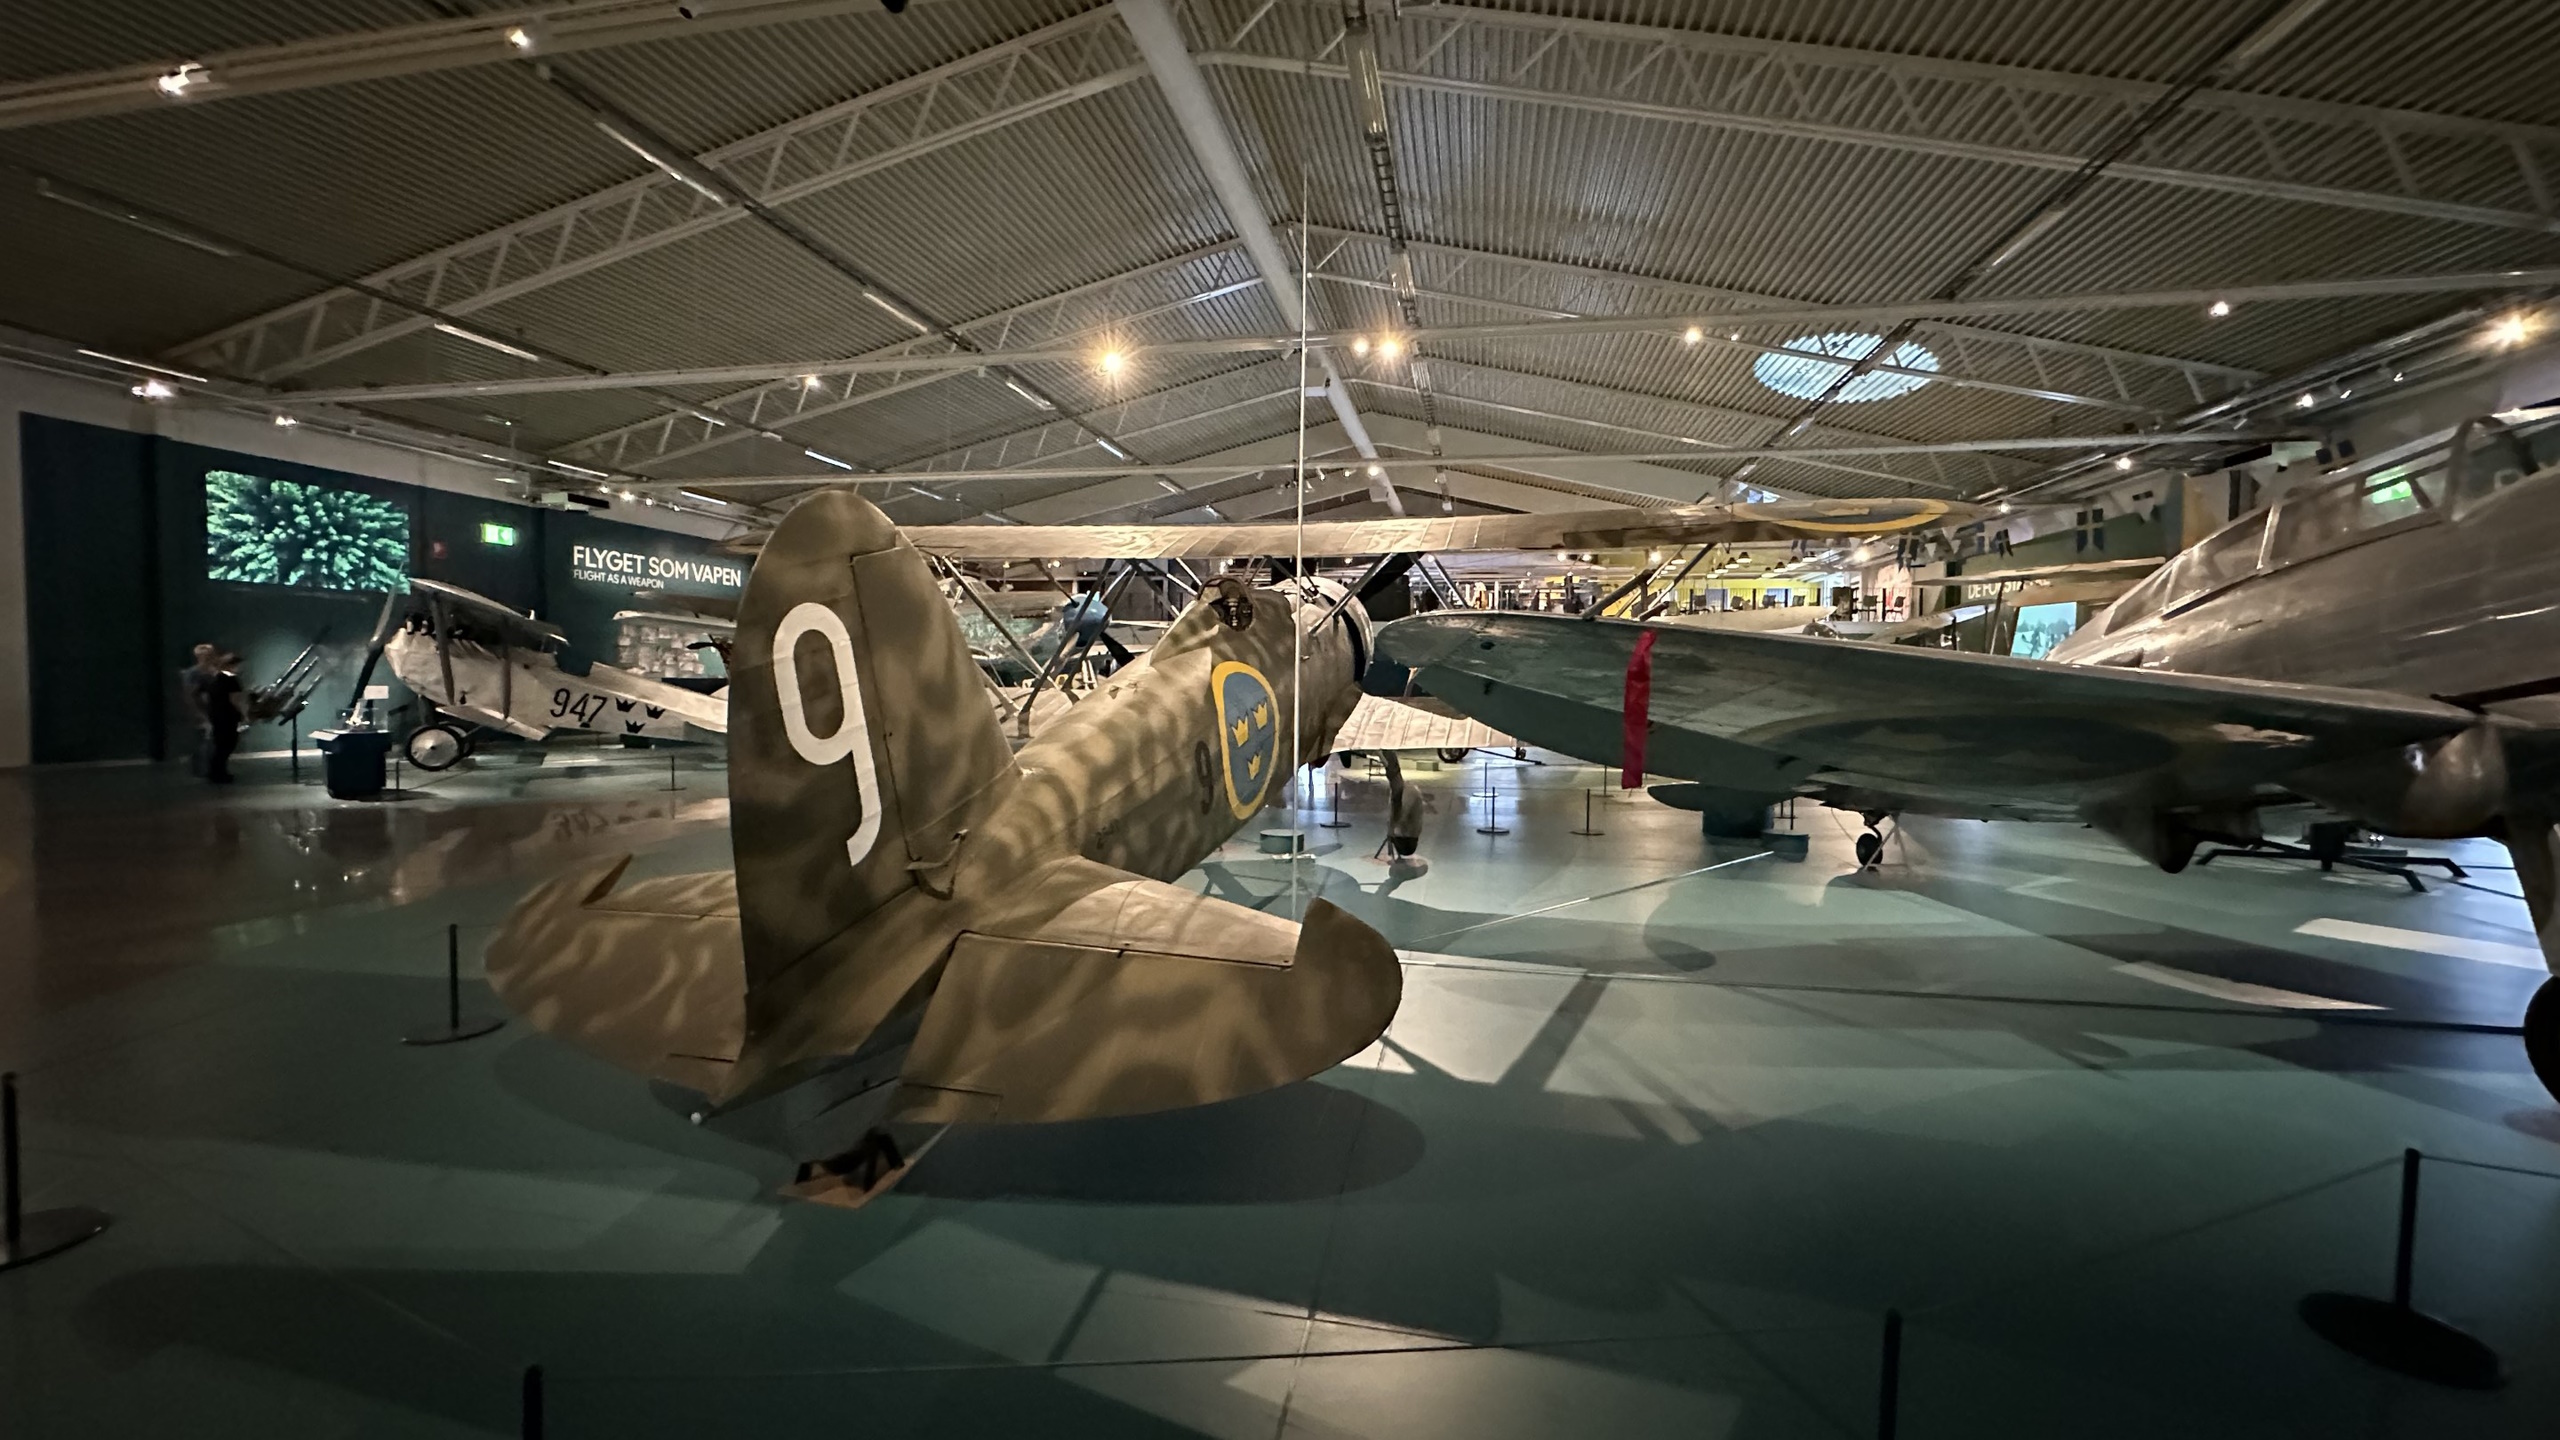 image from Flygvapenmuseum